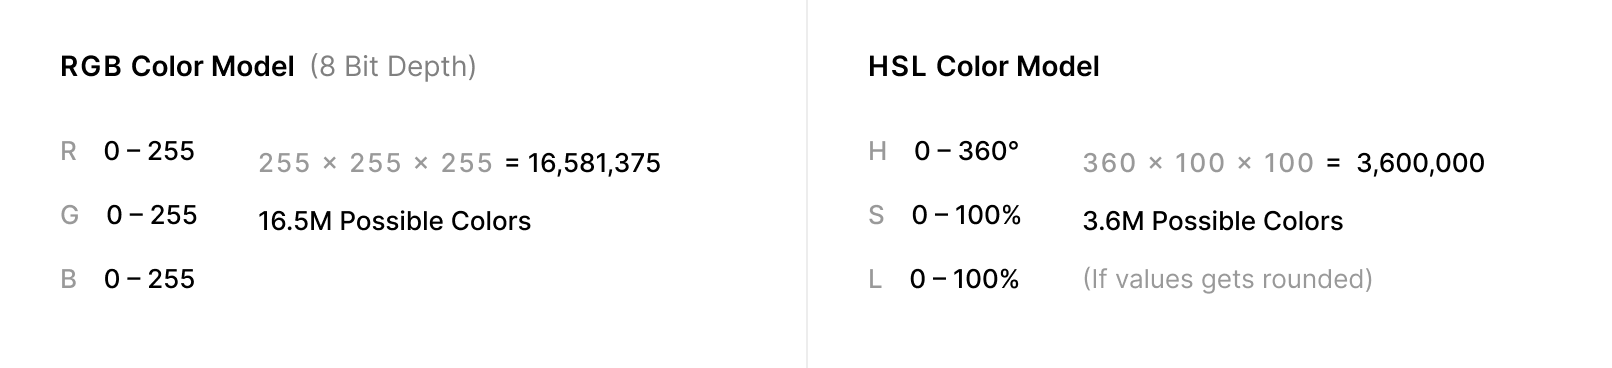 RGB vs HSL difference